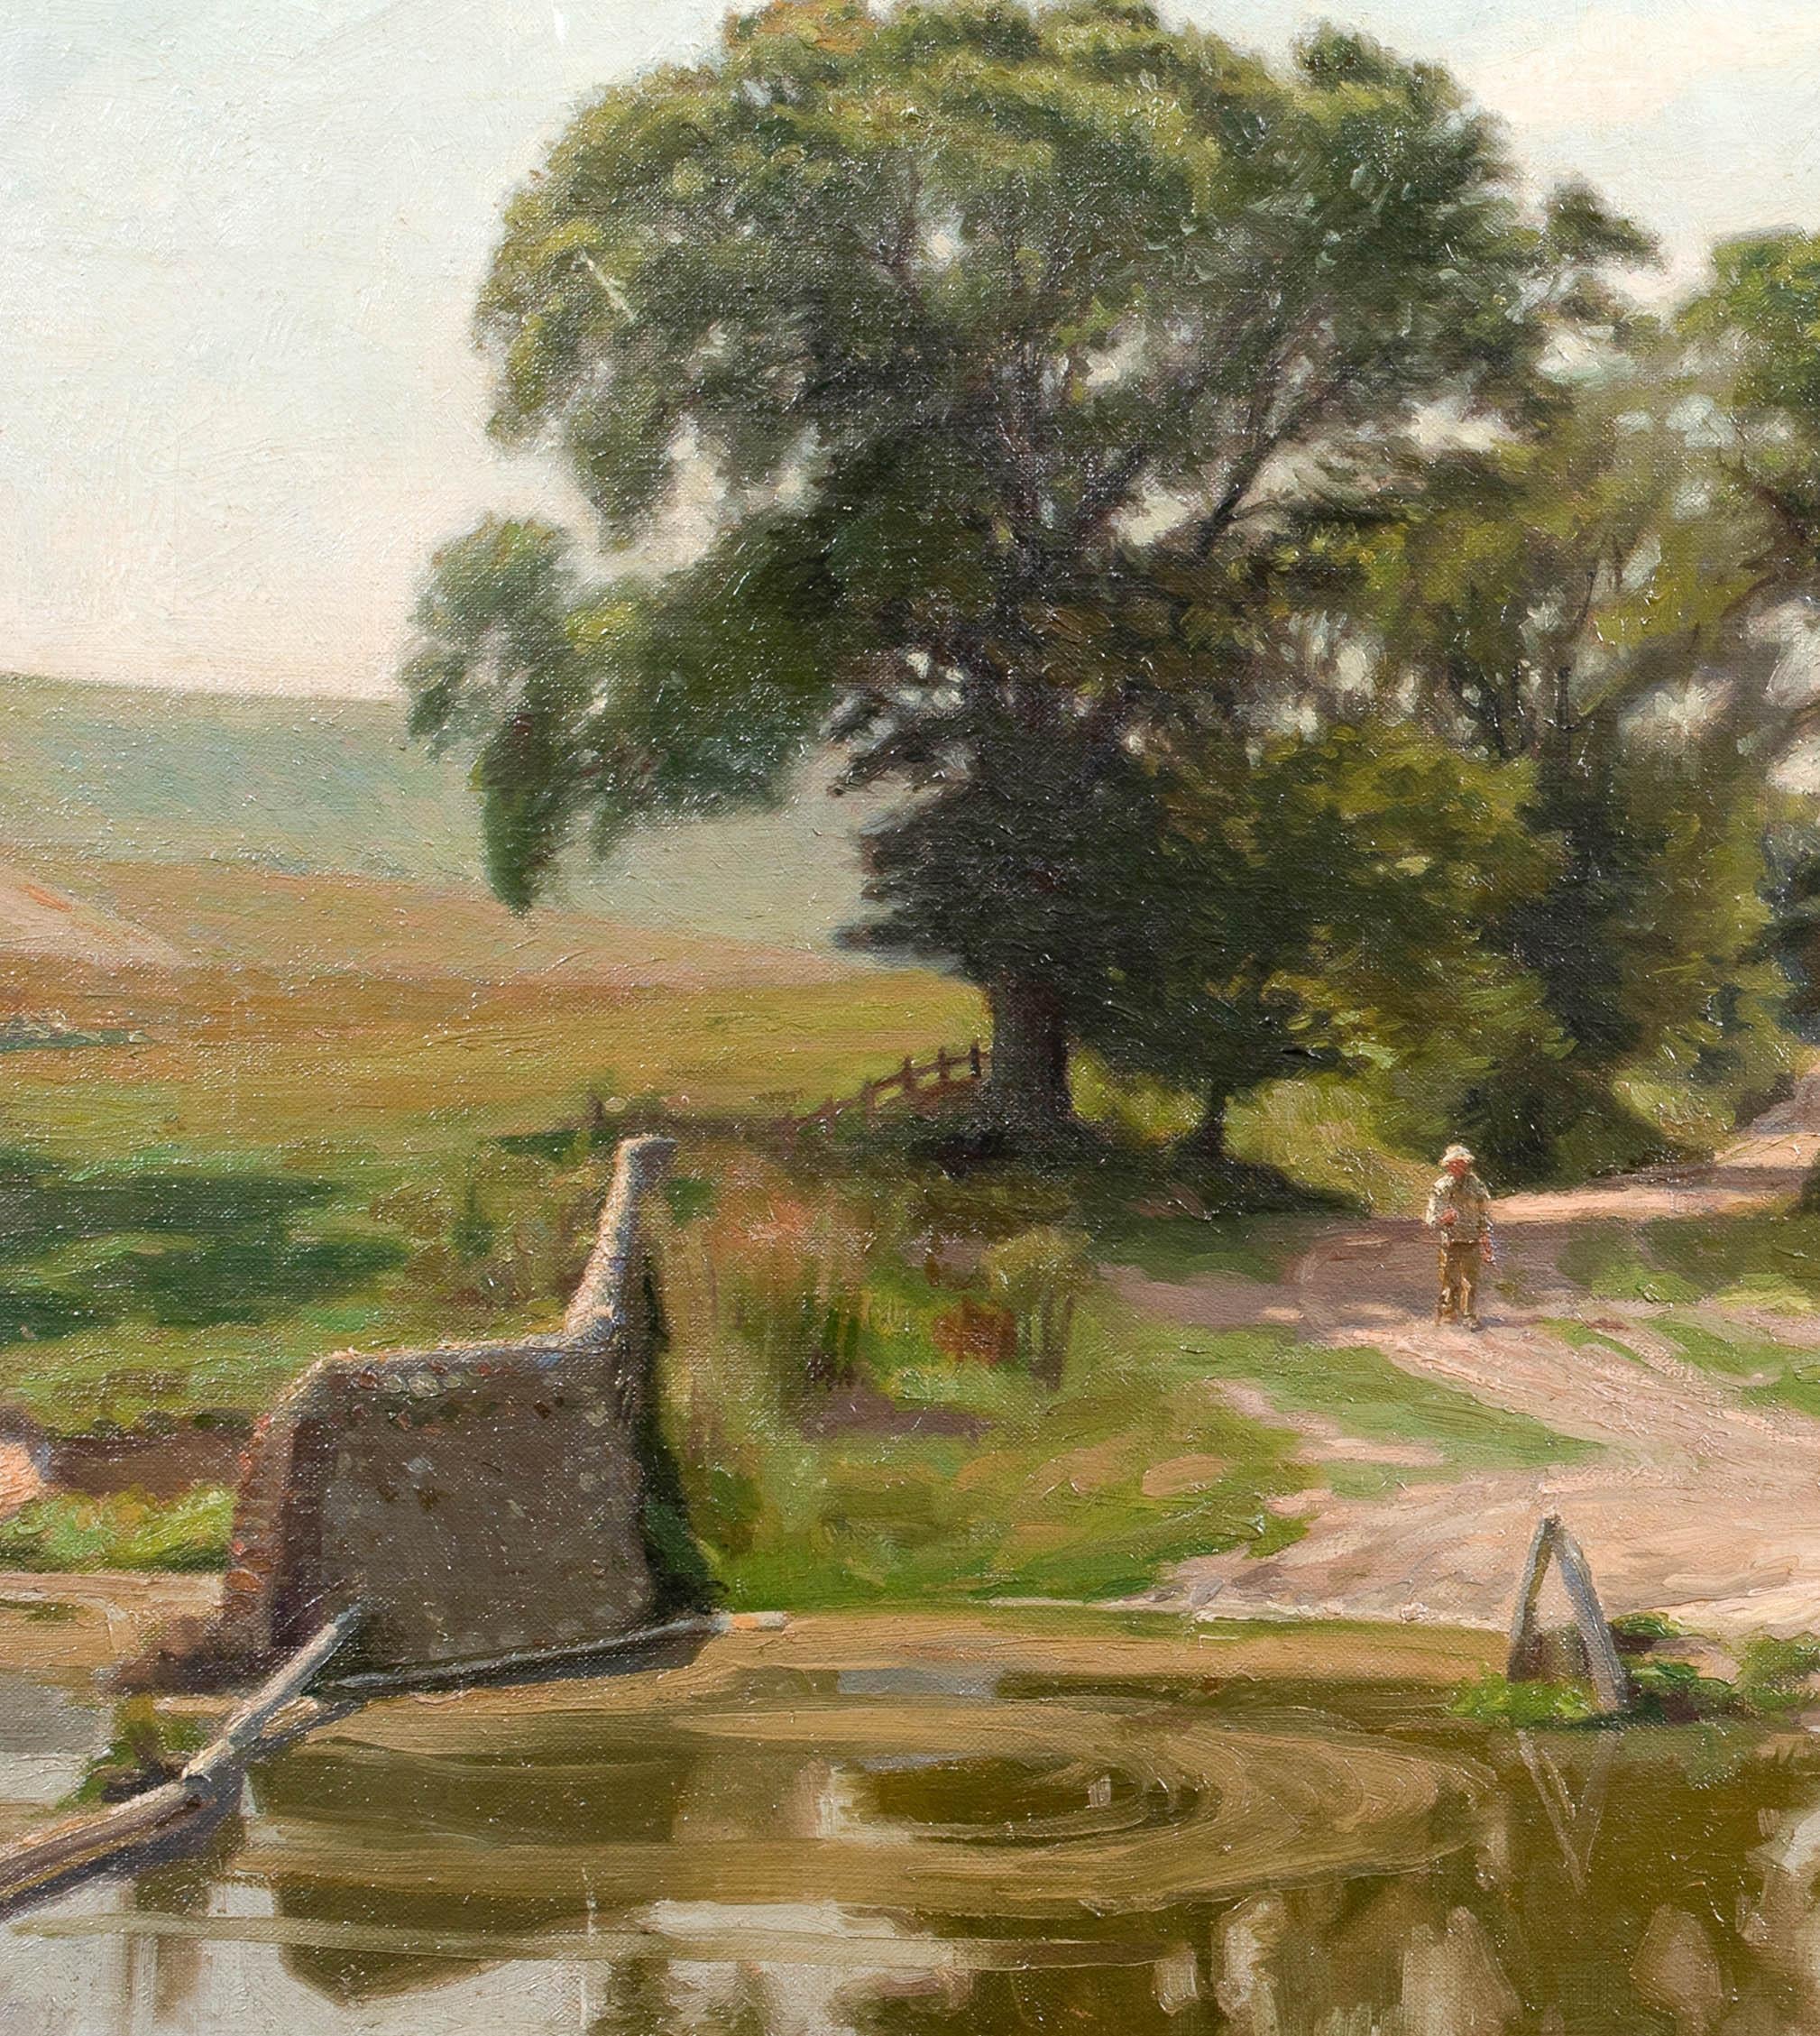 A Dorset Watering Hole, early 20th Century   by CHARLES HENRY HARRISON BURLEIGH  - Brown Landscape Painting by Charles H. Harrison Burleigh